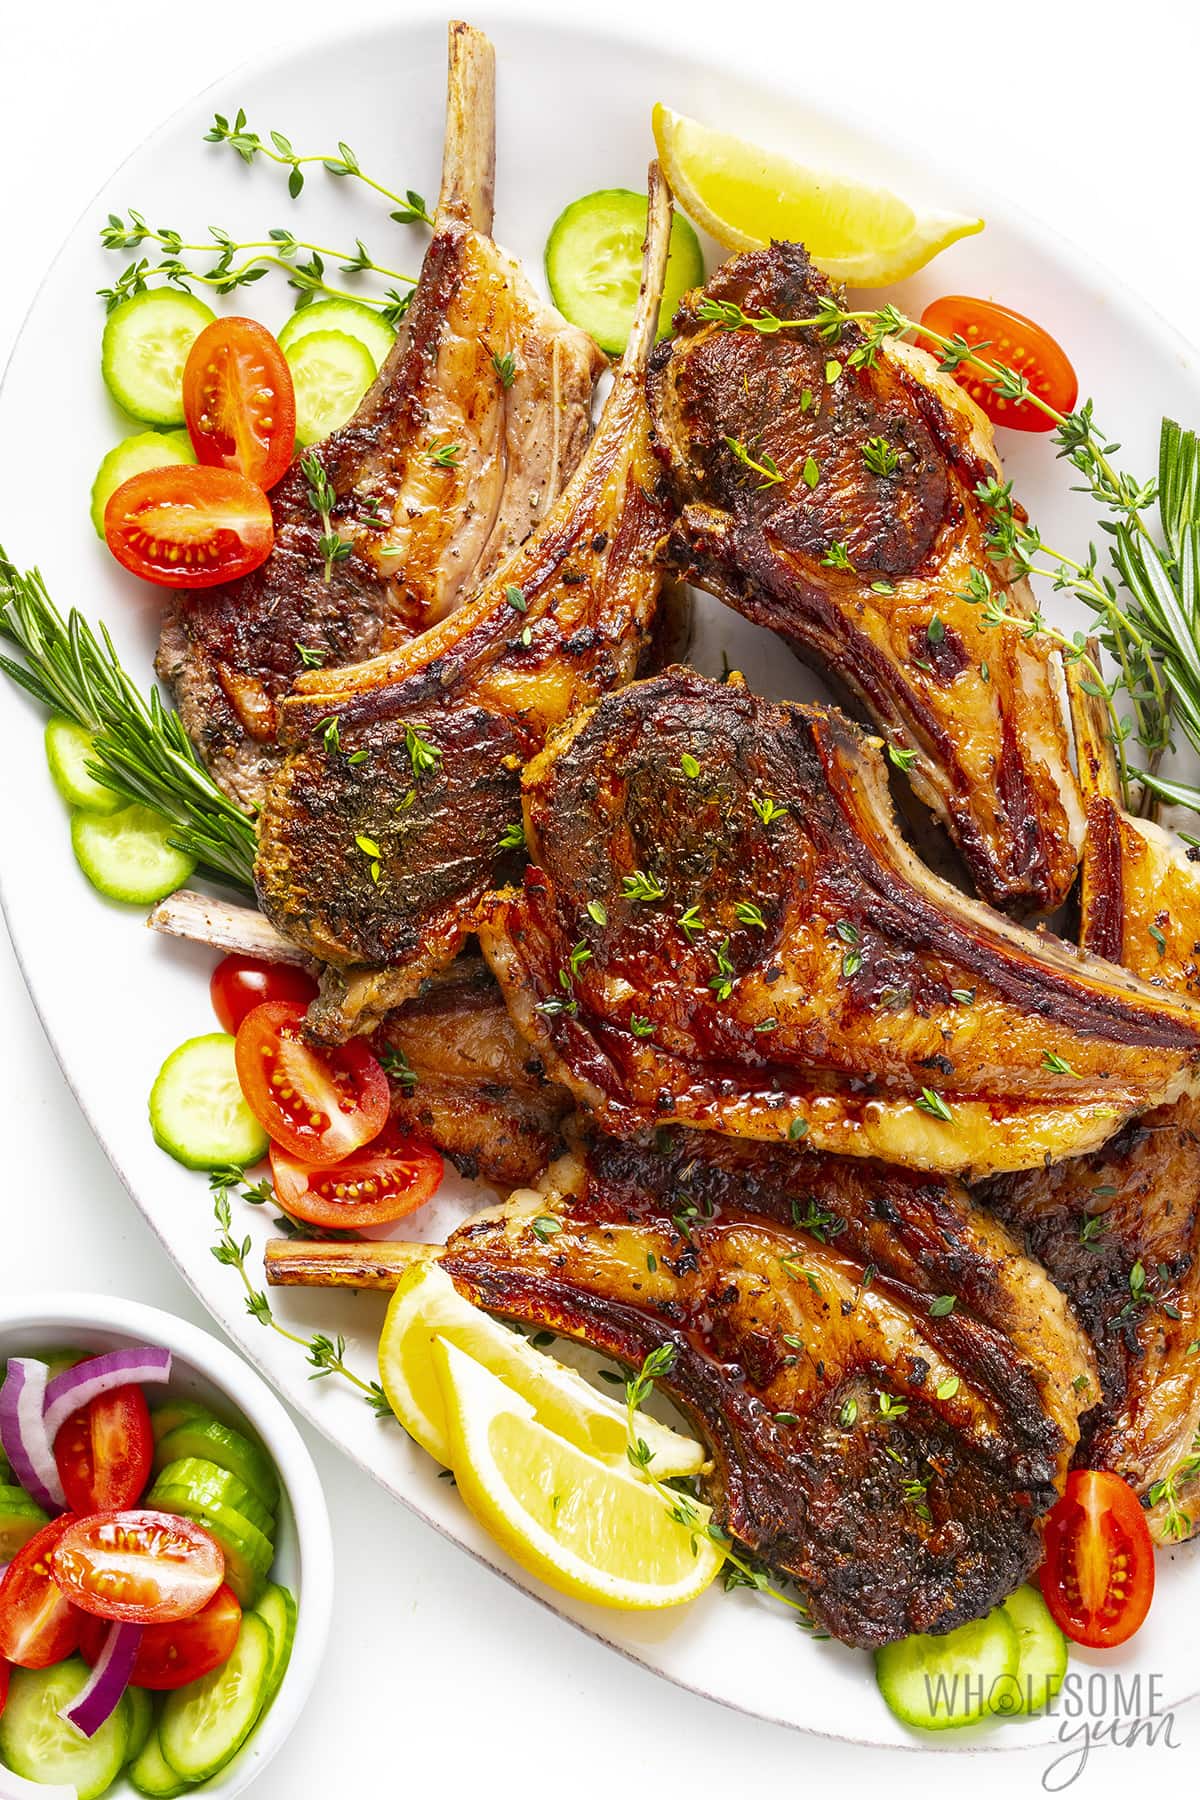 Oven baked lamb chops recipe on a platter.